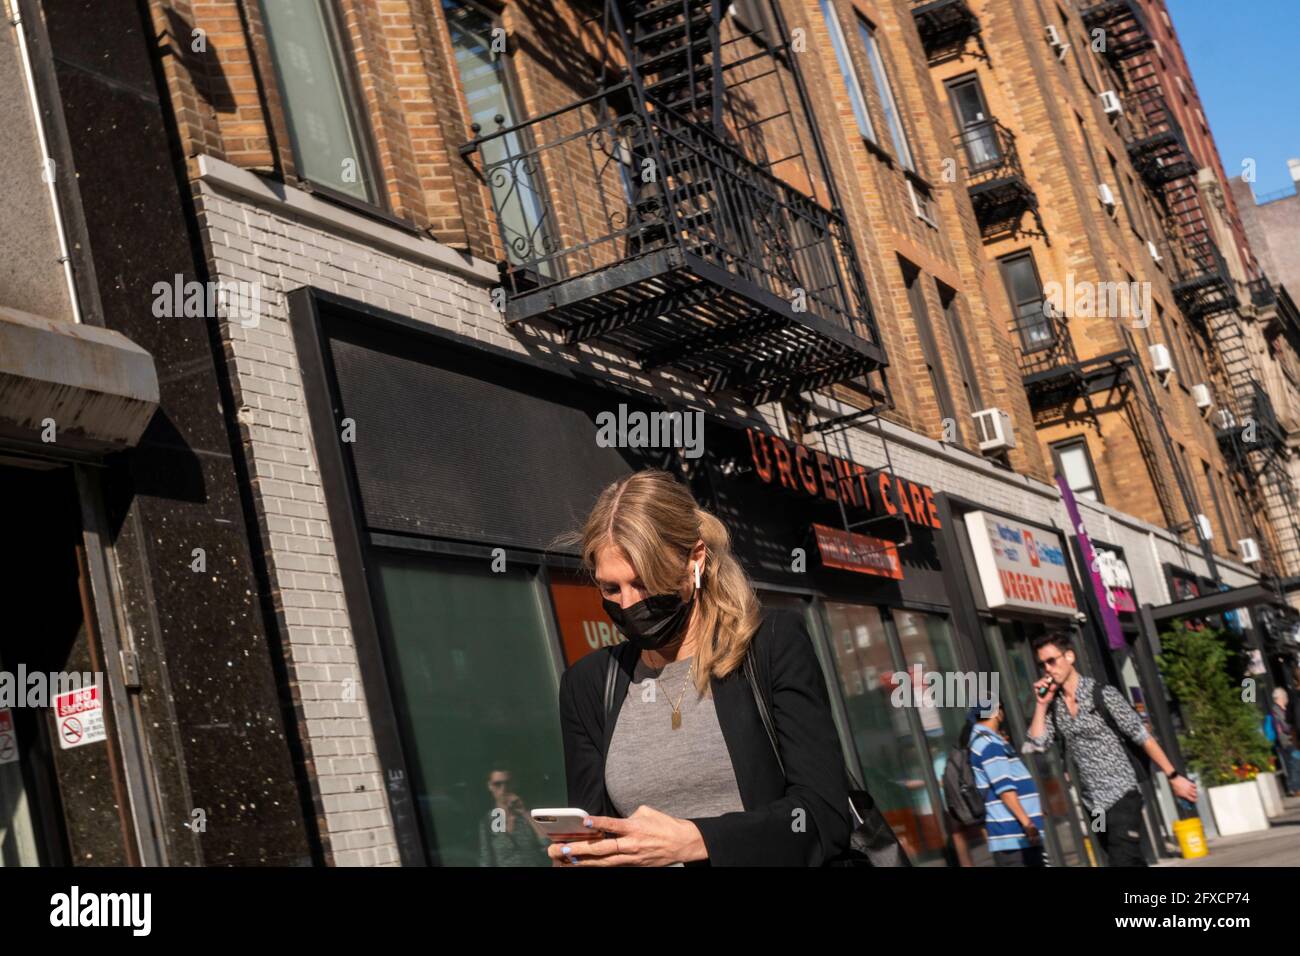 Masked and mask-less people in the Chelsea neighborhood in New York on Friday, May 21, 2021. New York has relaxed mask mandates allowing most outdoor activities to be mask free as well as many indoor settings, with caveats. (© Richard B. Levine) Stock Photo